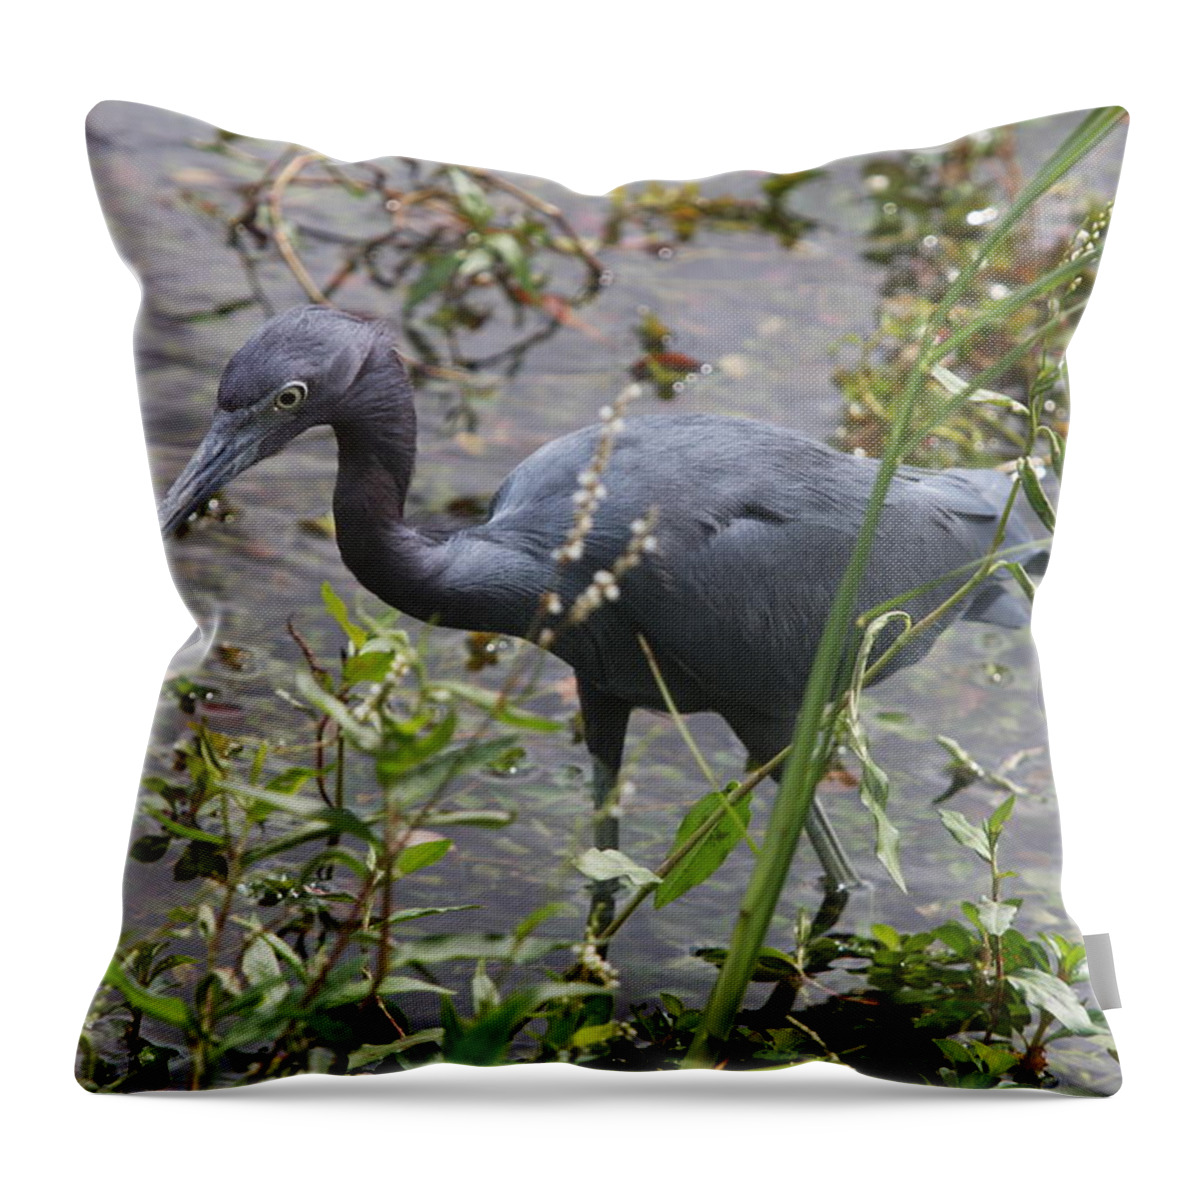 Heron Throw Pillow featuring the photograph Little Blue Heron - Waiting For Prey by Christiane Schulze Art And Photography